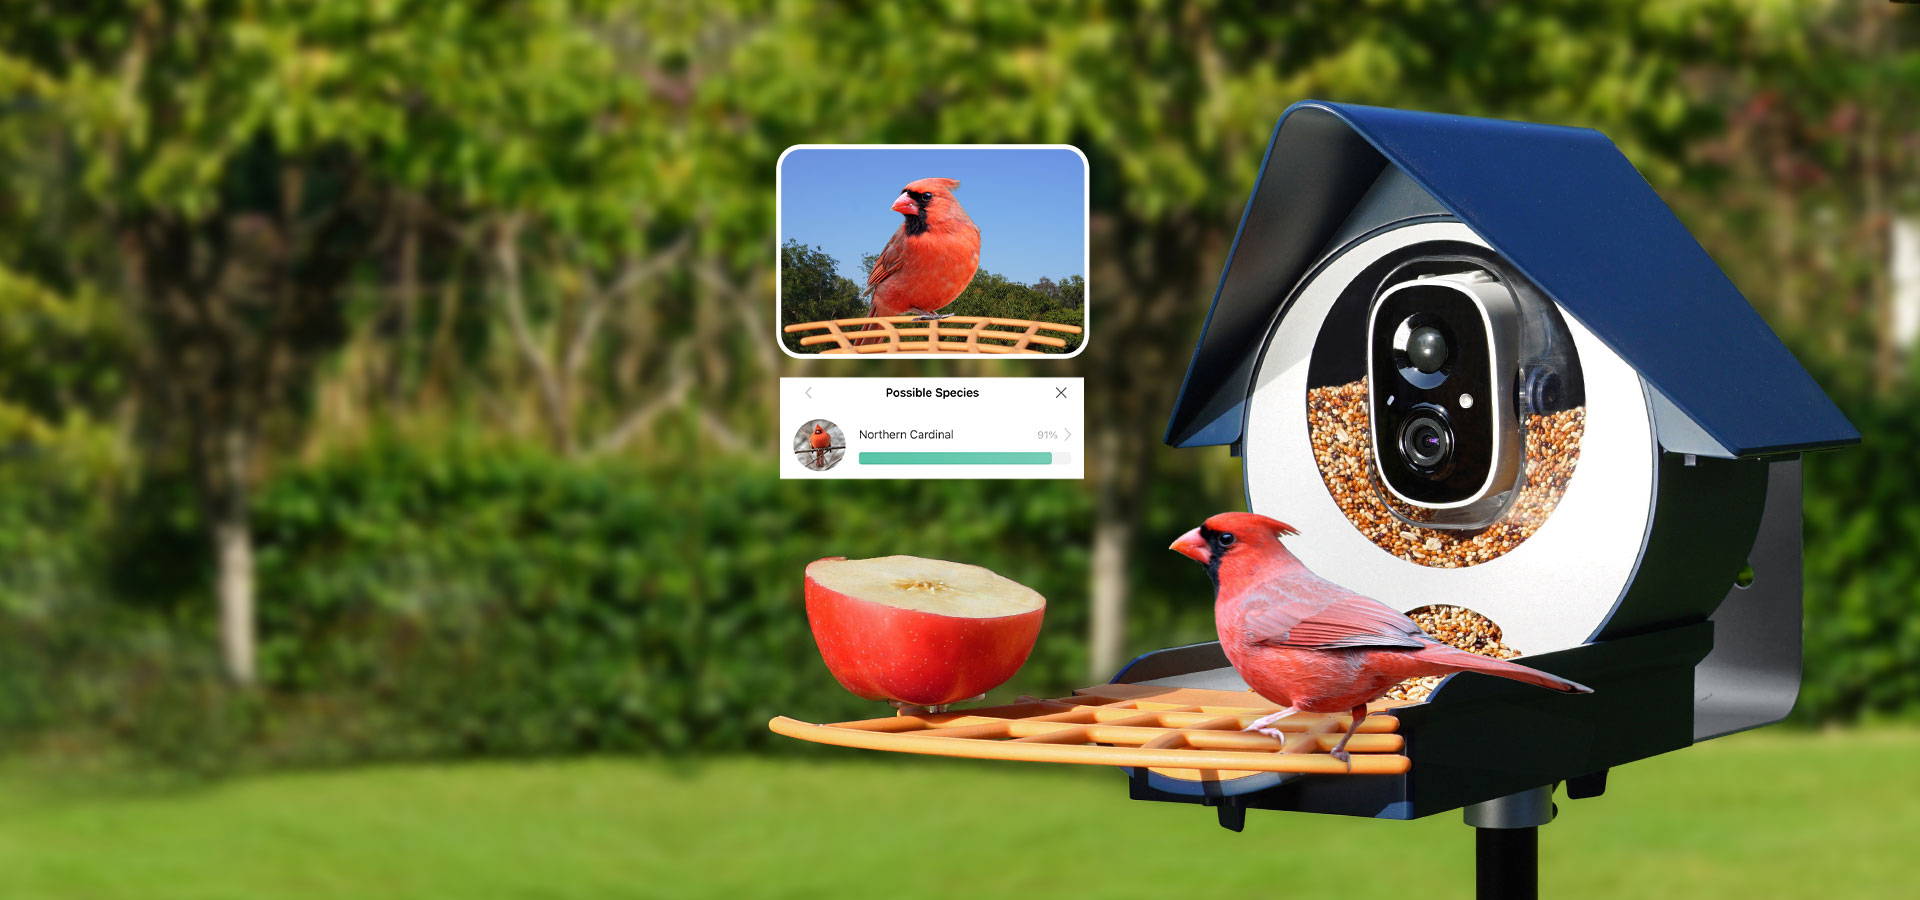 Cardinal Identified at Birdkiss Smart Bird Feeder and Displaying Name for us